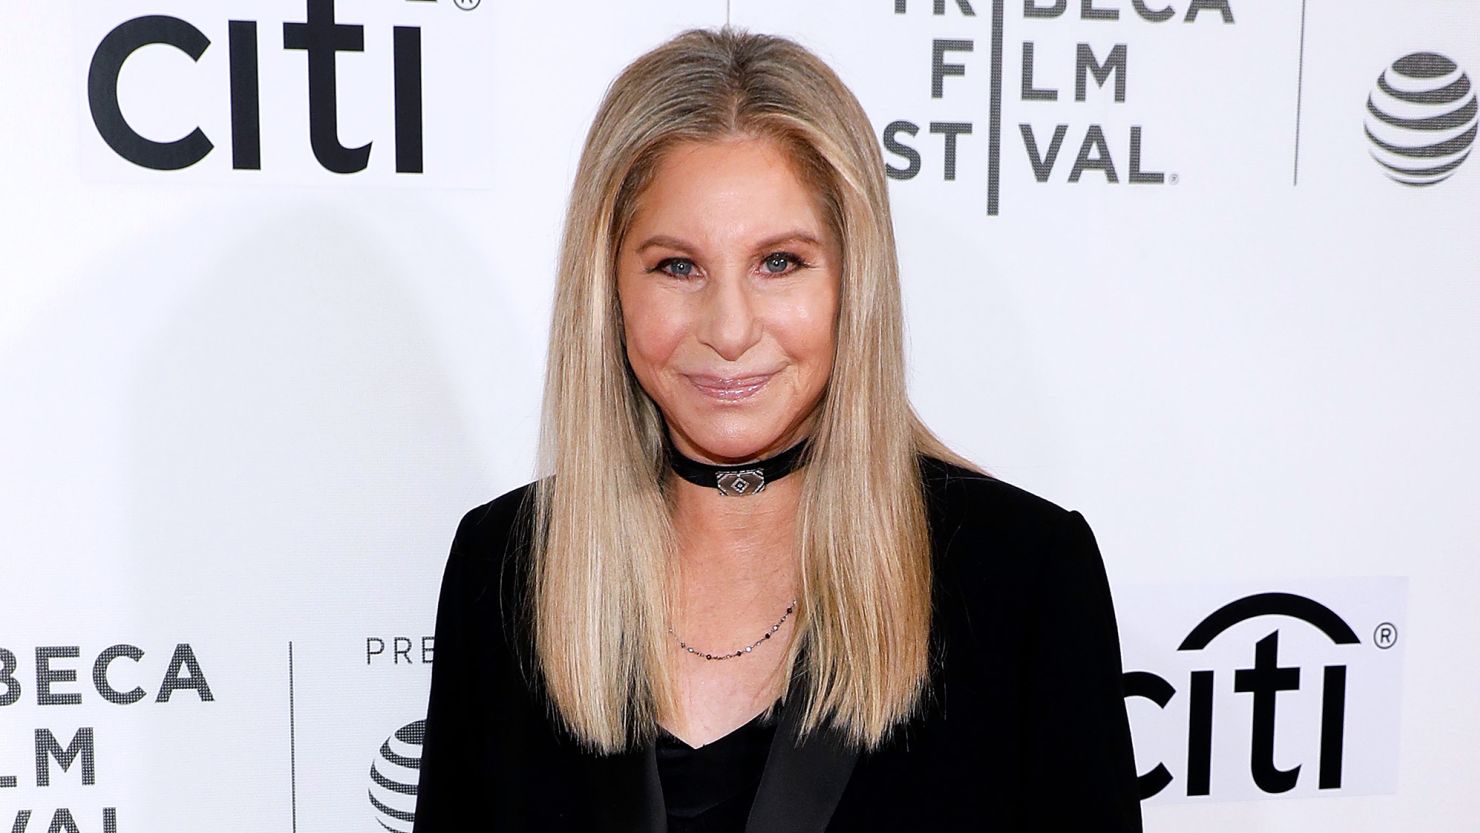 NEW YORK, NY - APRIL 29:  Barbra Streisand attends "Tribeca Talks: Storytellers" during the 2017 Tribeca Film Festival at Borough of Manhattan Community College on April 29, 2017 in New York City.  (Photo by Taylor Hill/Getty Images)